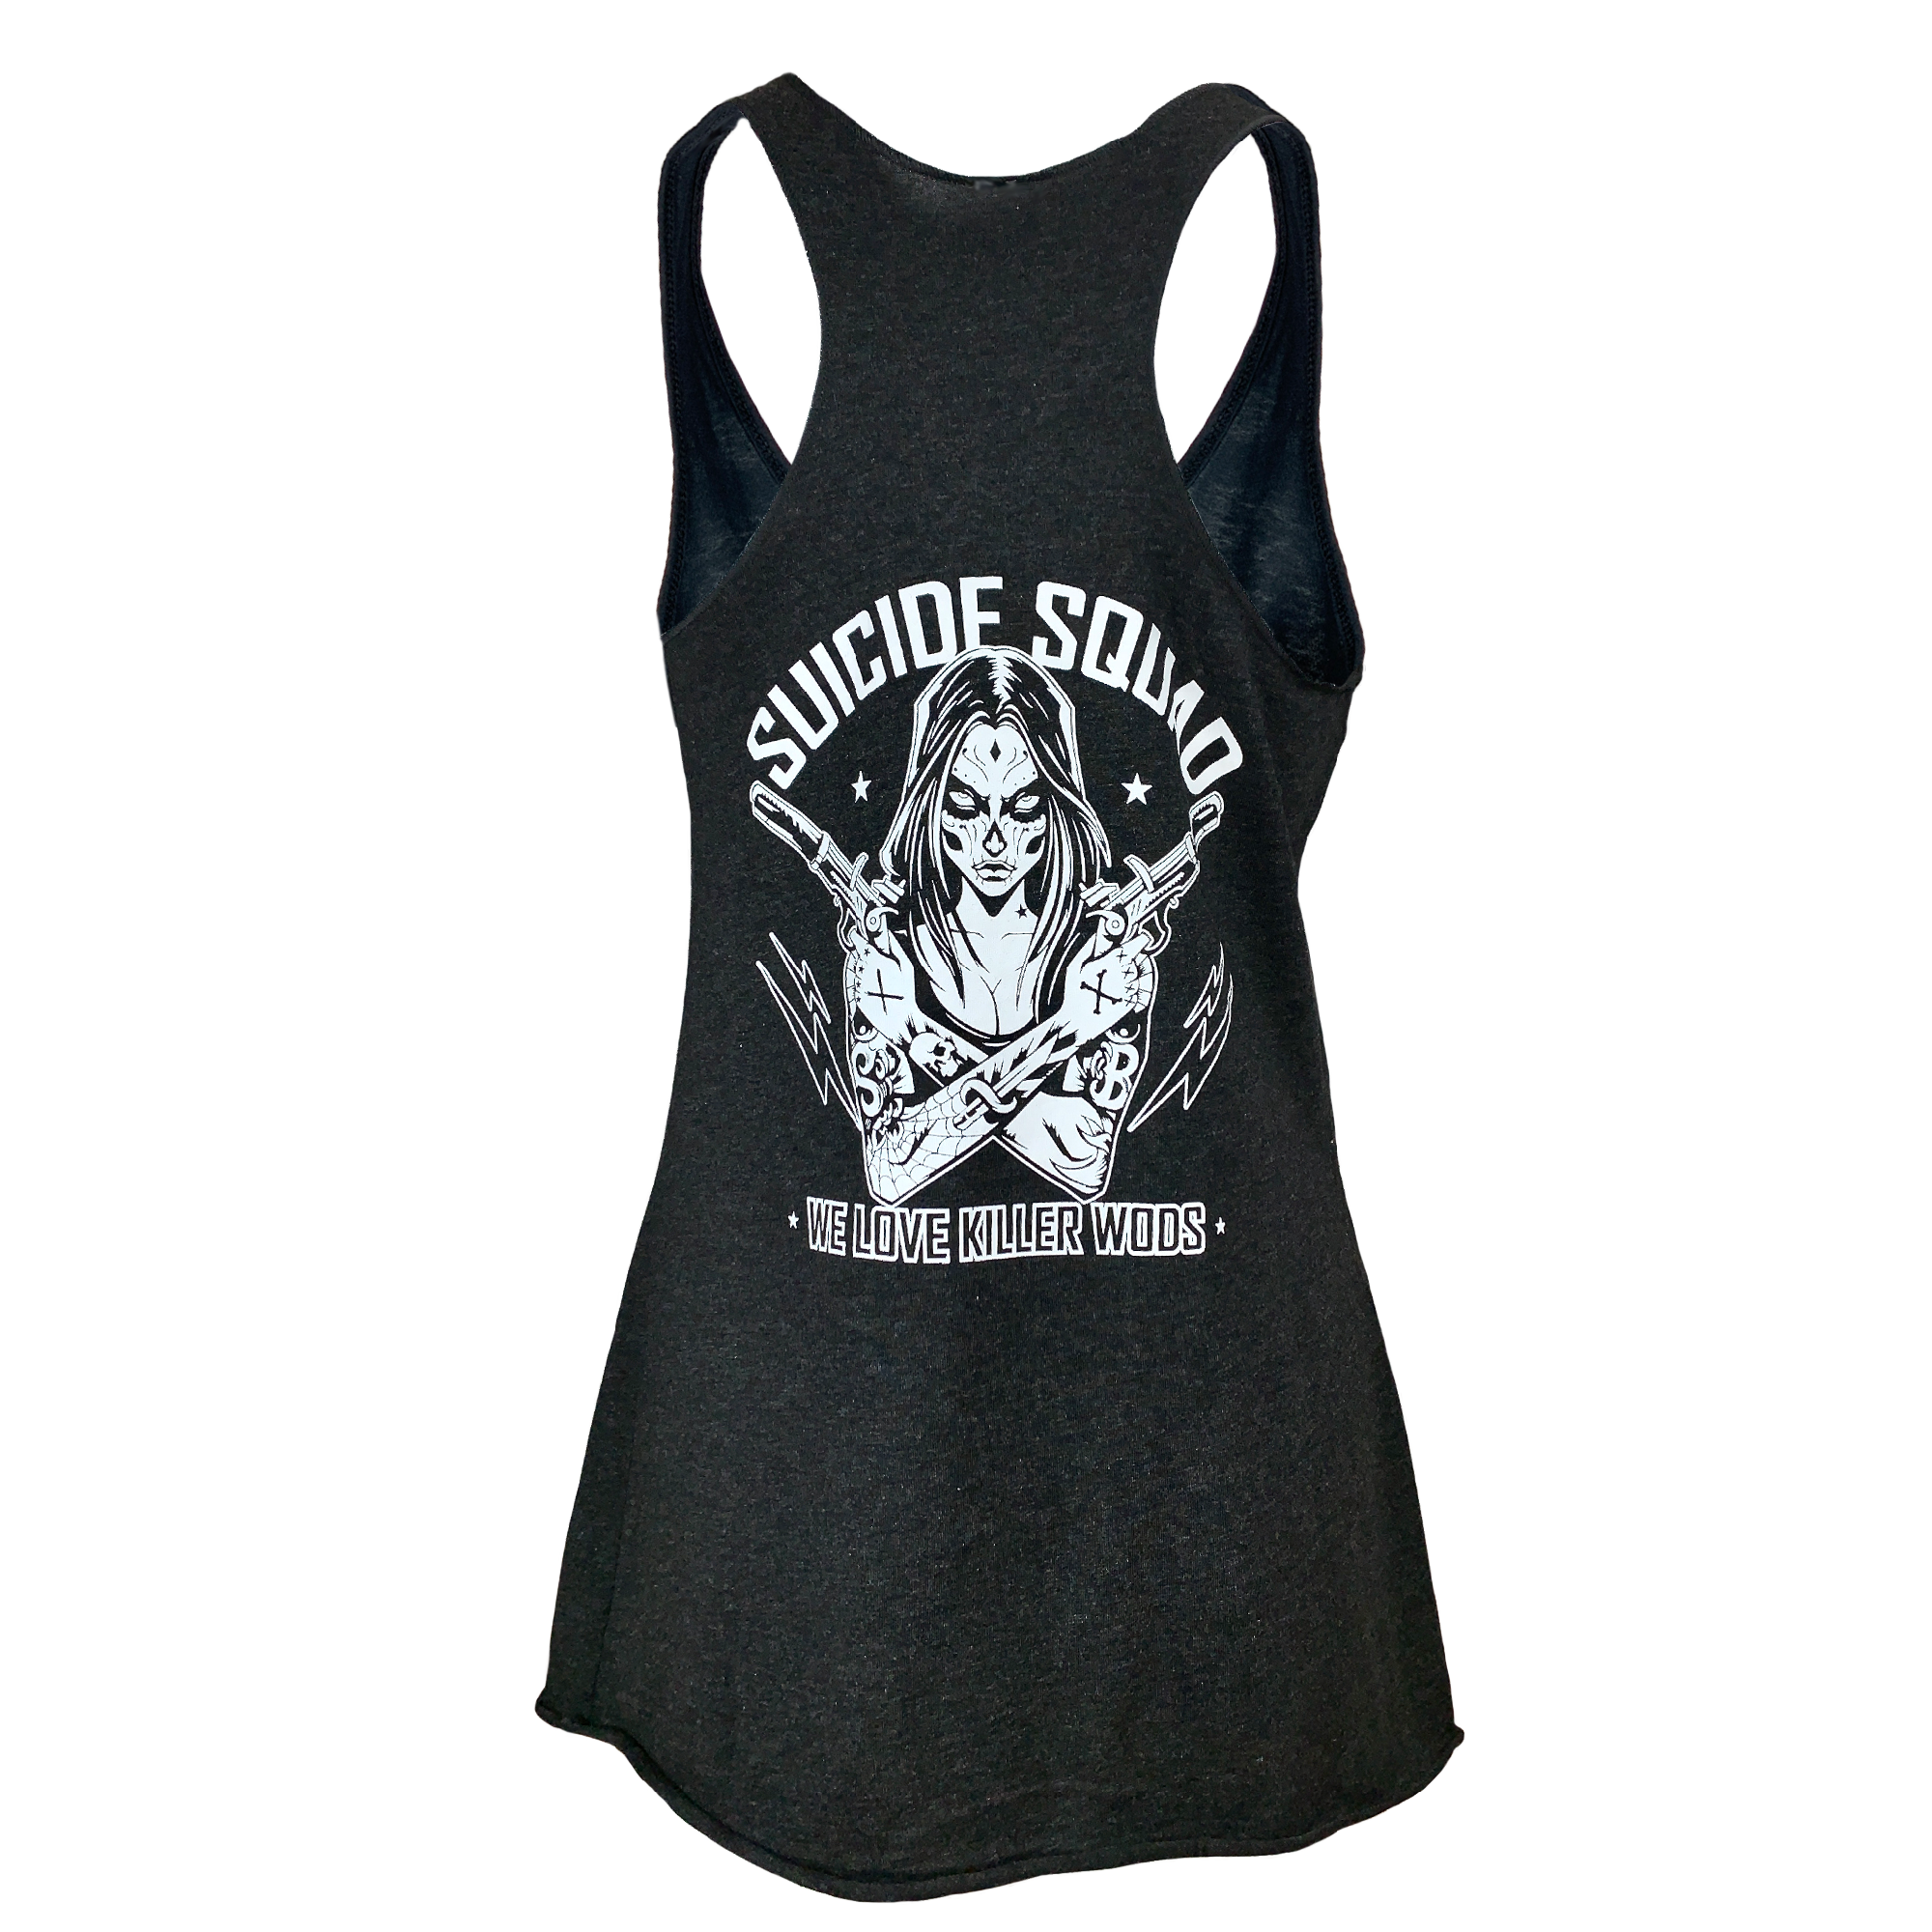 Women's Tank Top - Suicide Squad - Savage Barbell Apparel